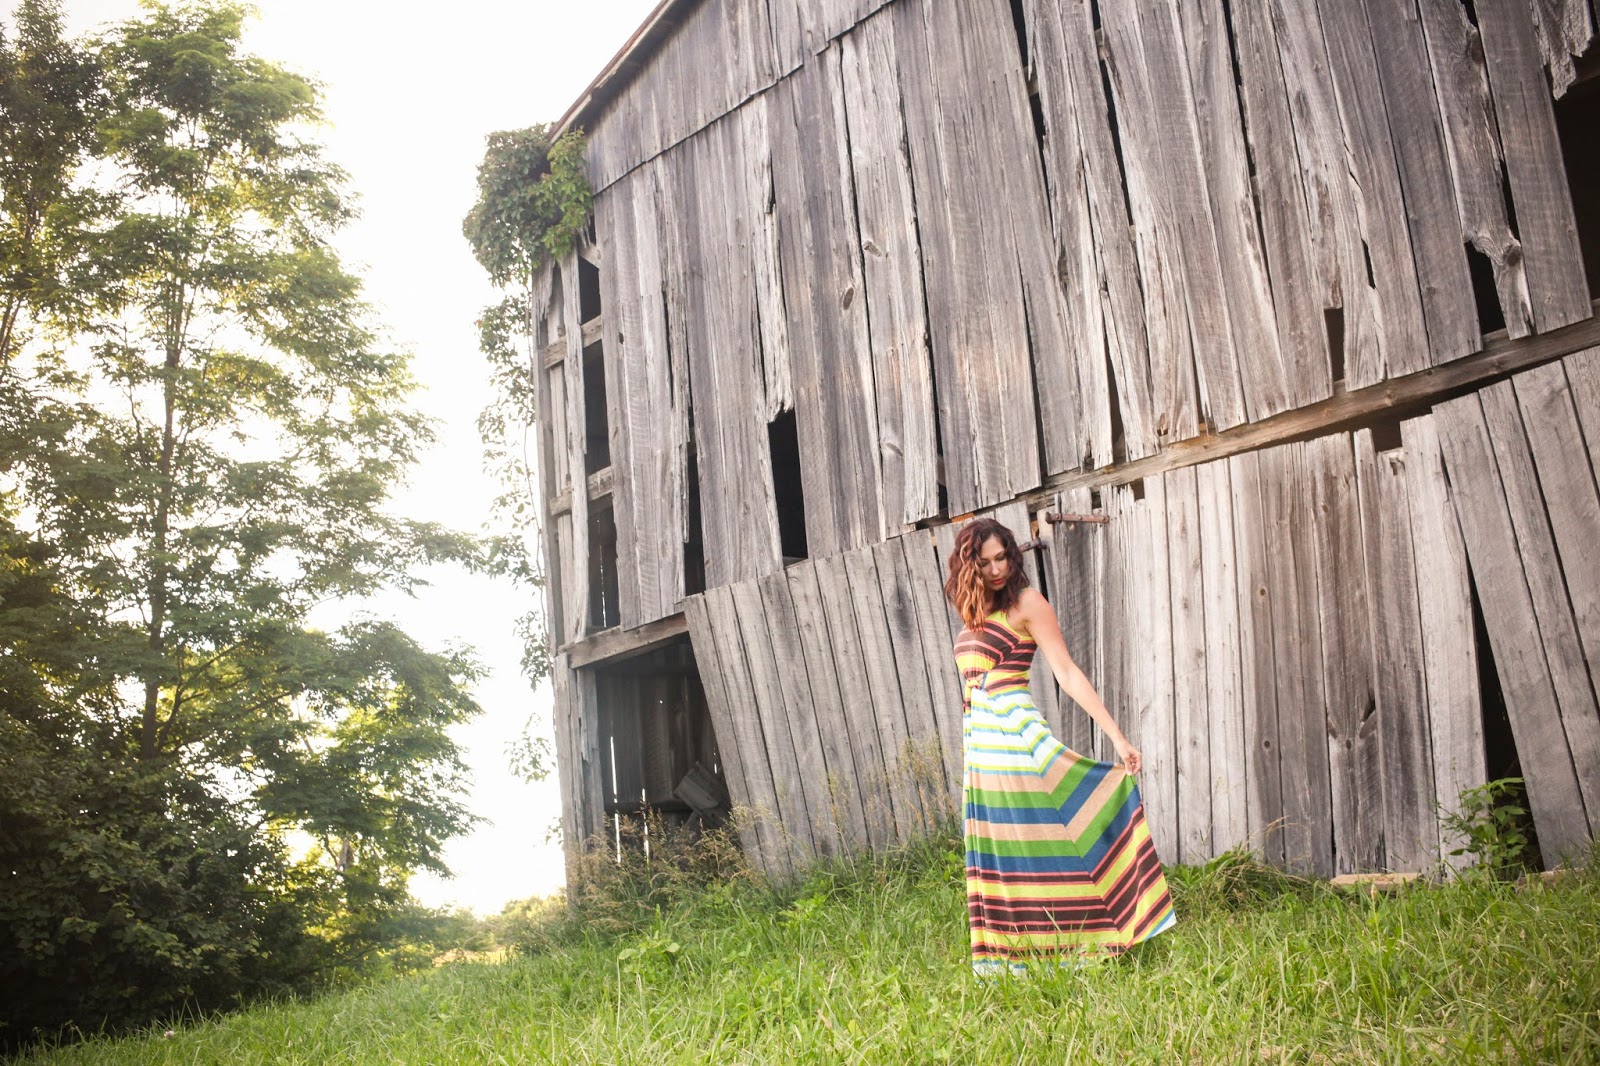 Amy West in Maxi Dress outside of old barn